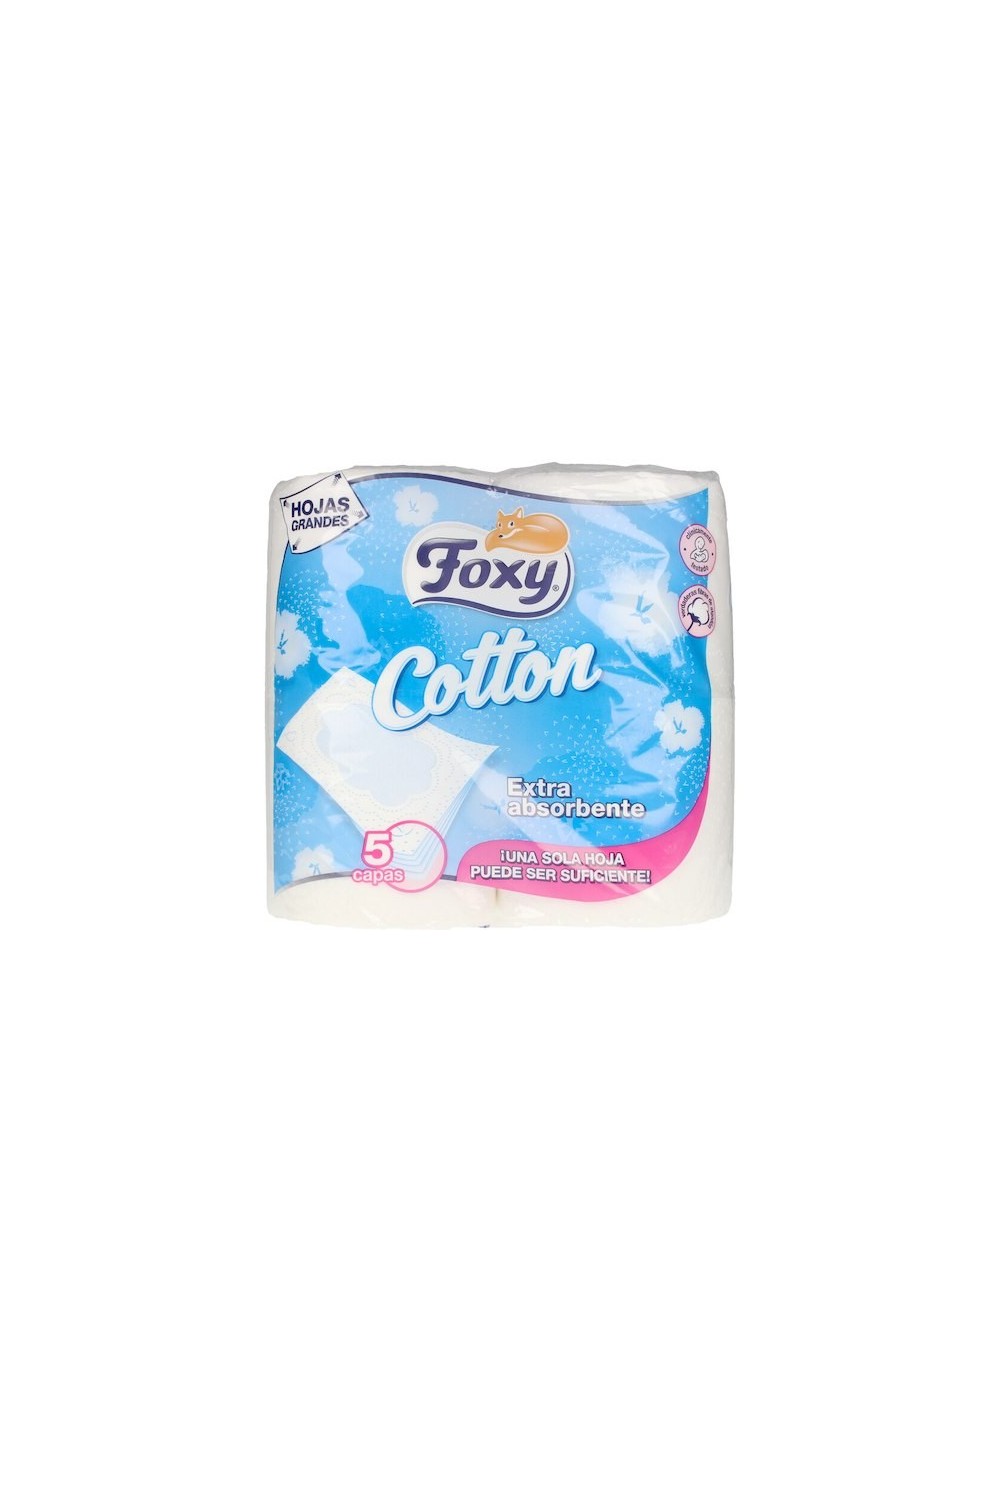 Foxy Cotton Toilet Paper 5 Layers 4 Rolls